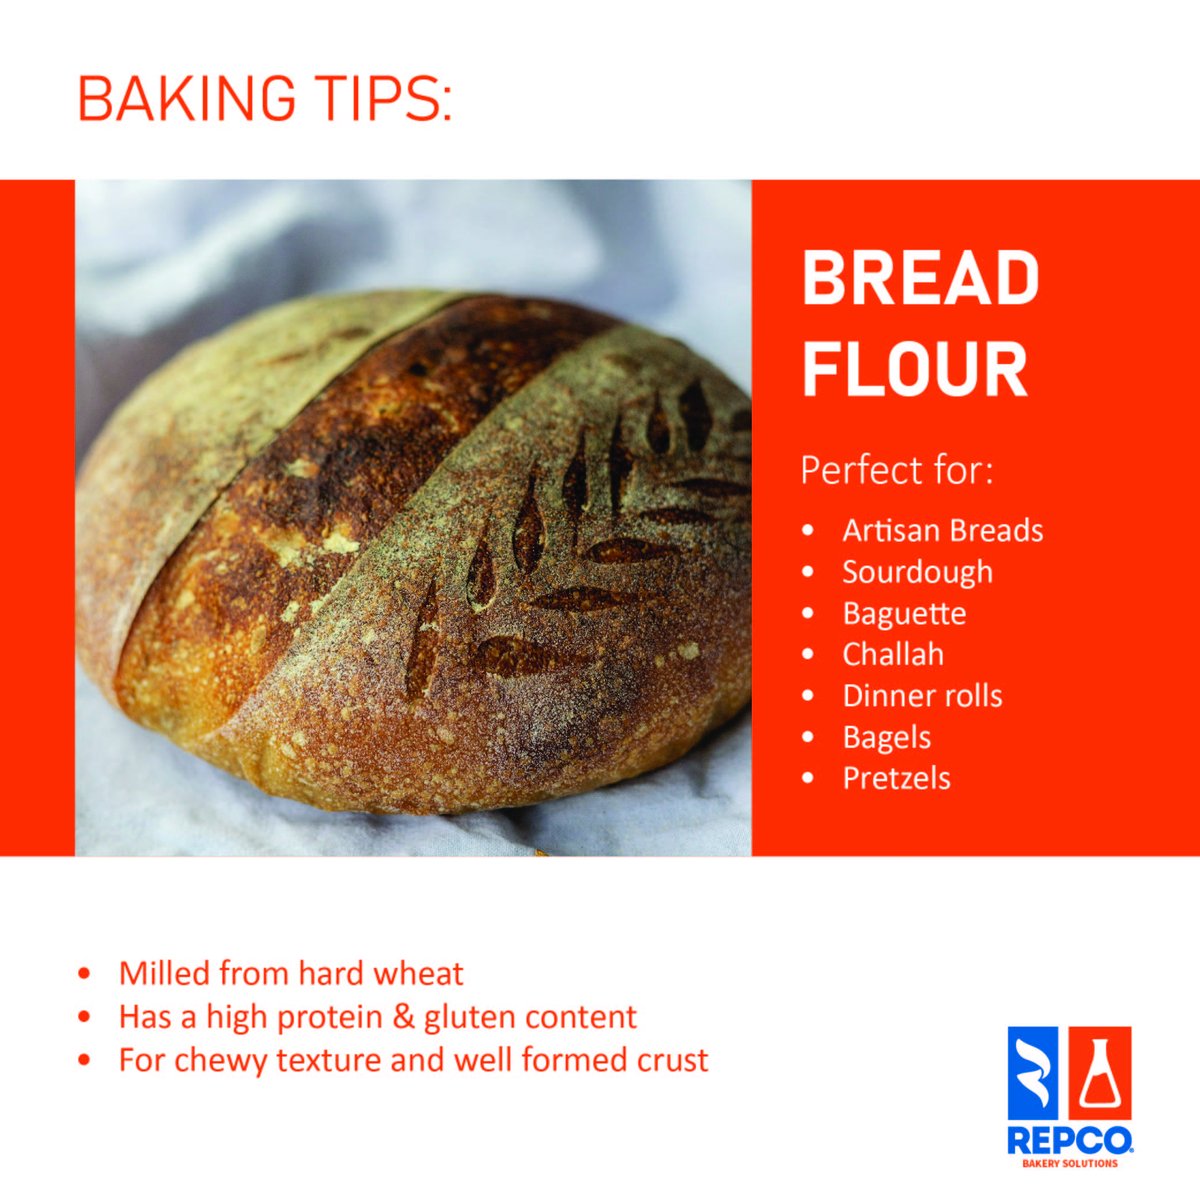 Let's talk about different types of flour. 👩‍🍳

Do you know how bread flour is used? With its high protein content and gluten structure, bread flour is perfect for creating that chewy, airy texture and robust crust in artisan breads.🥖

 #bakingtips #breadflour #commercialbaking